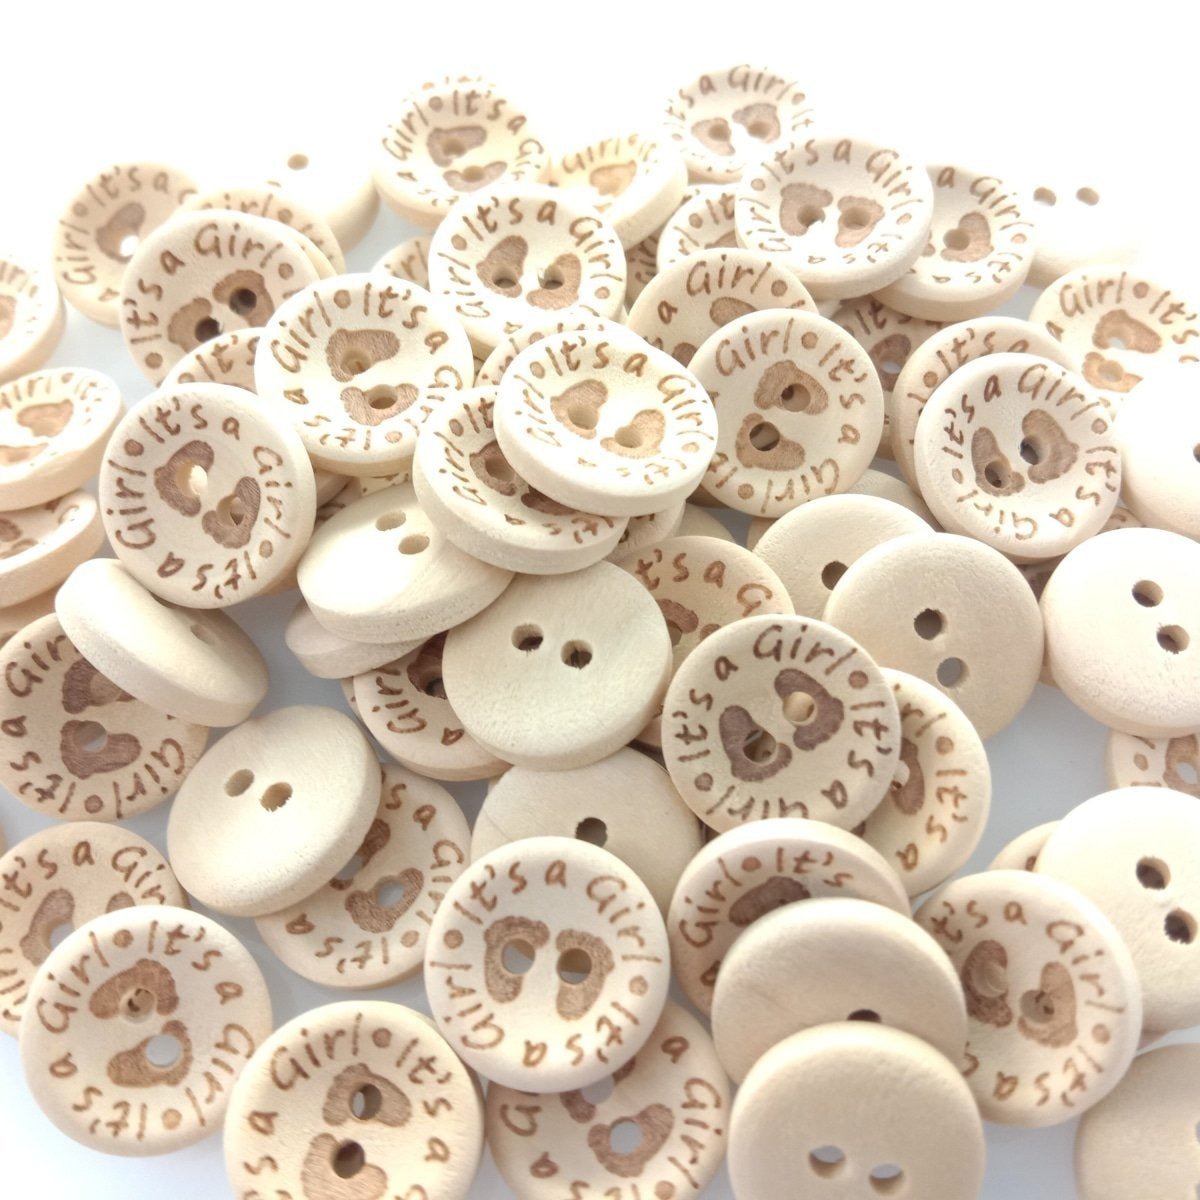 15/20/25mm It's a Girl/Boy Wooden Button Natural Wood Sewing Baby Clothing Buttons - It's a Girl 15mm 50pcs - Asia Sell